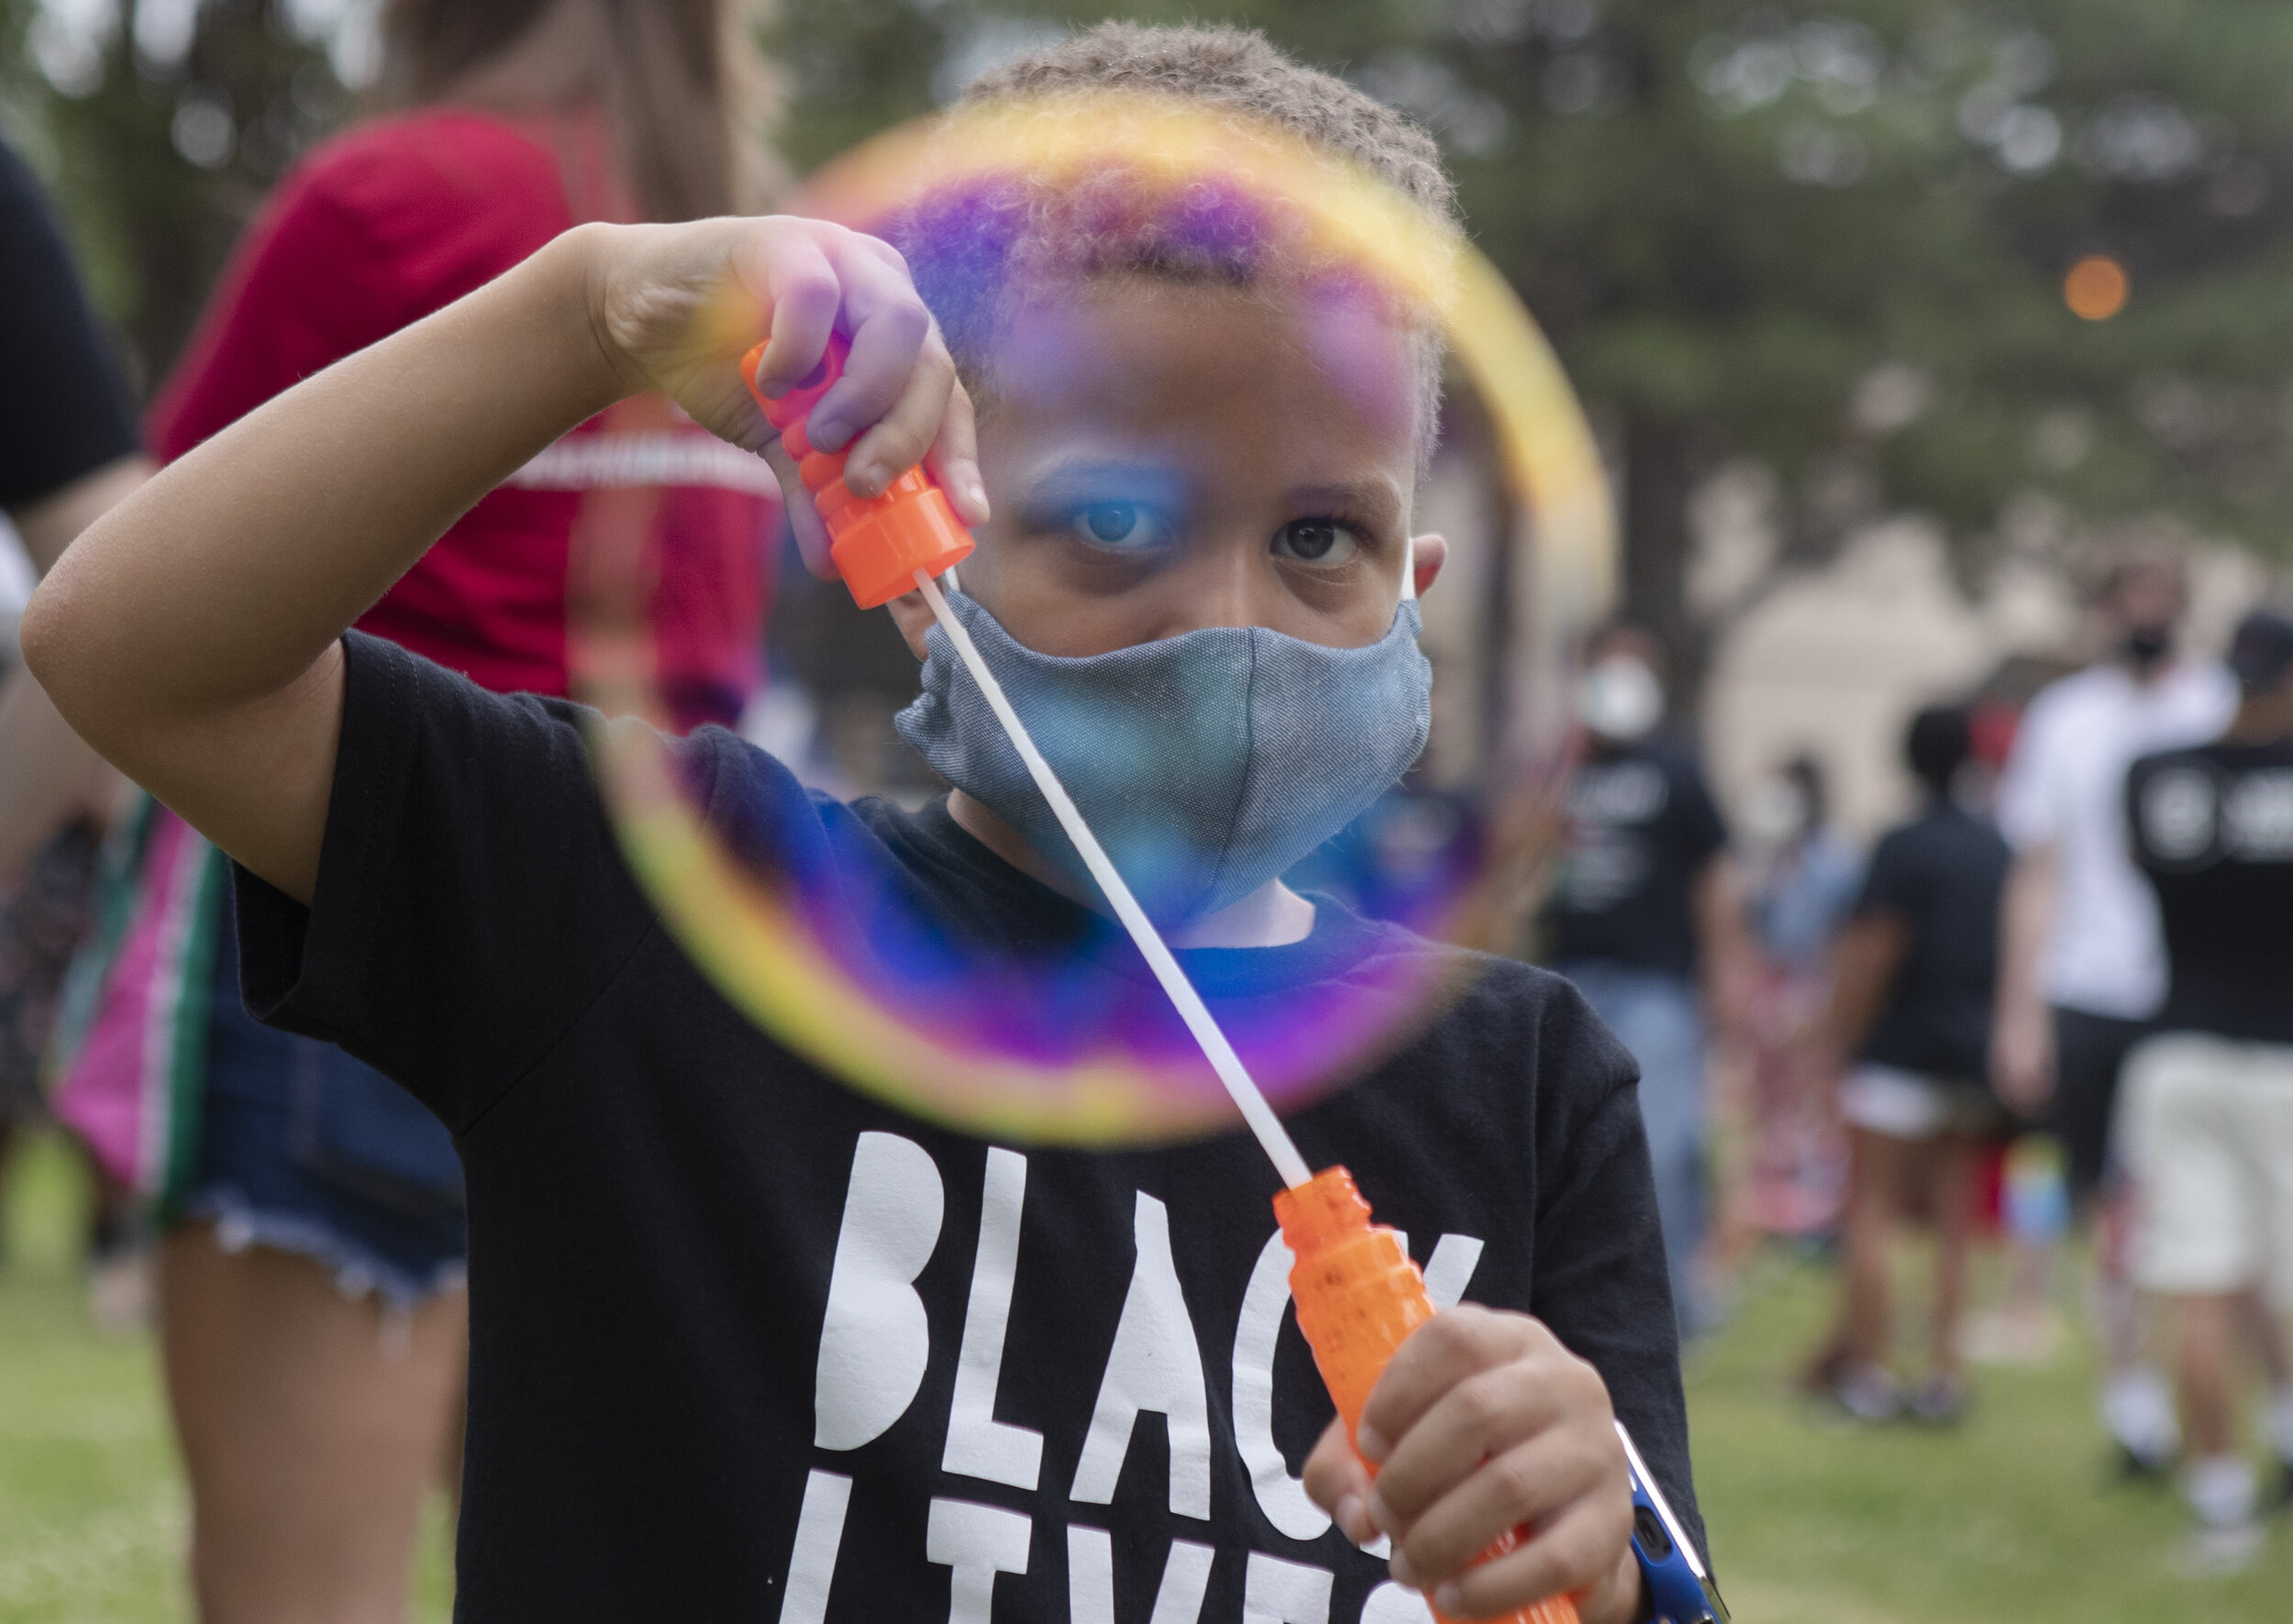  Charleston Okosun creates a swath of bubbles using a bubble wand he was given during the Juneteenth celebration at the Indian Center on Friday, June 19, 2020. KENNETH FERRIERA, Journal Star. 